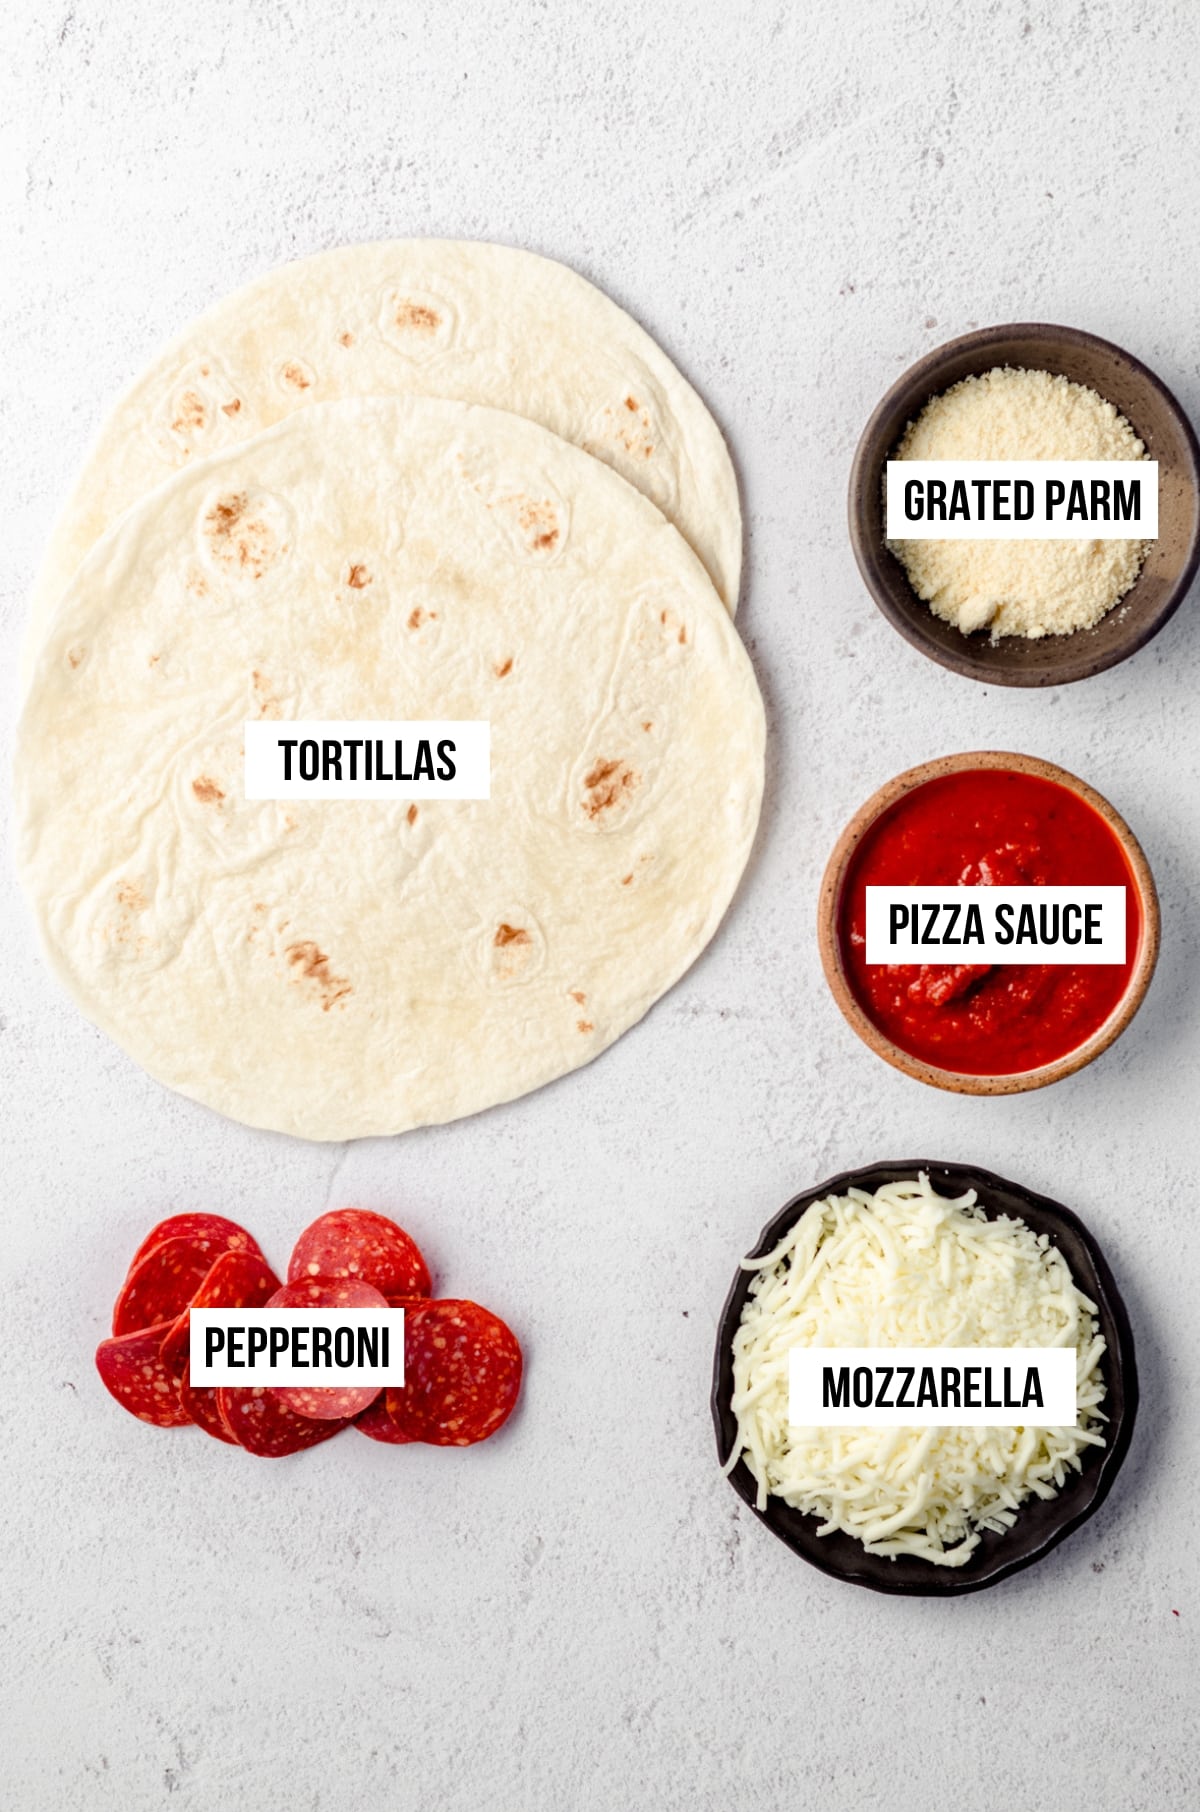 Aerial photo of ingredients to make tortilla pizza with text overlay labeling each ingredient.